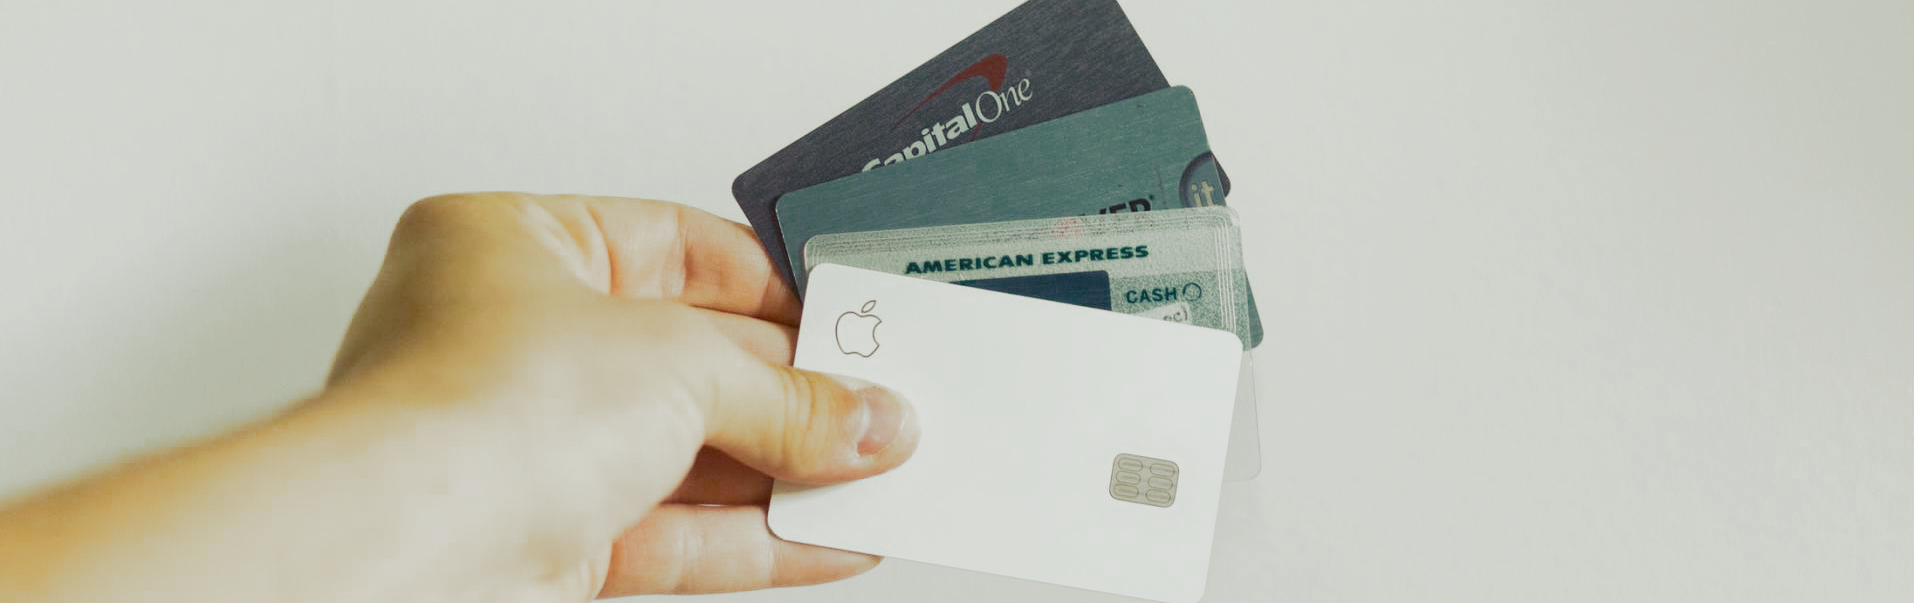 Image of had holding credit cards